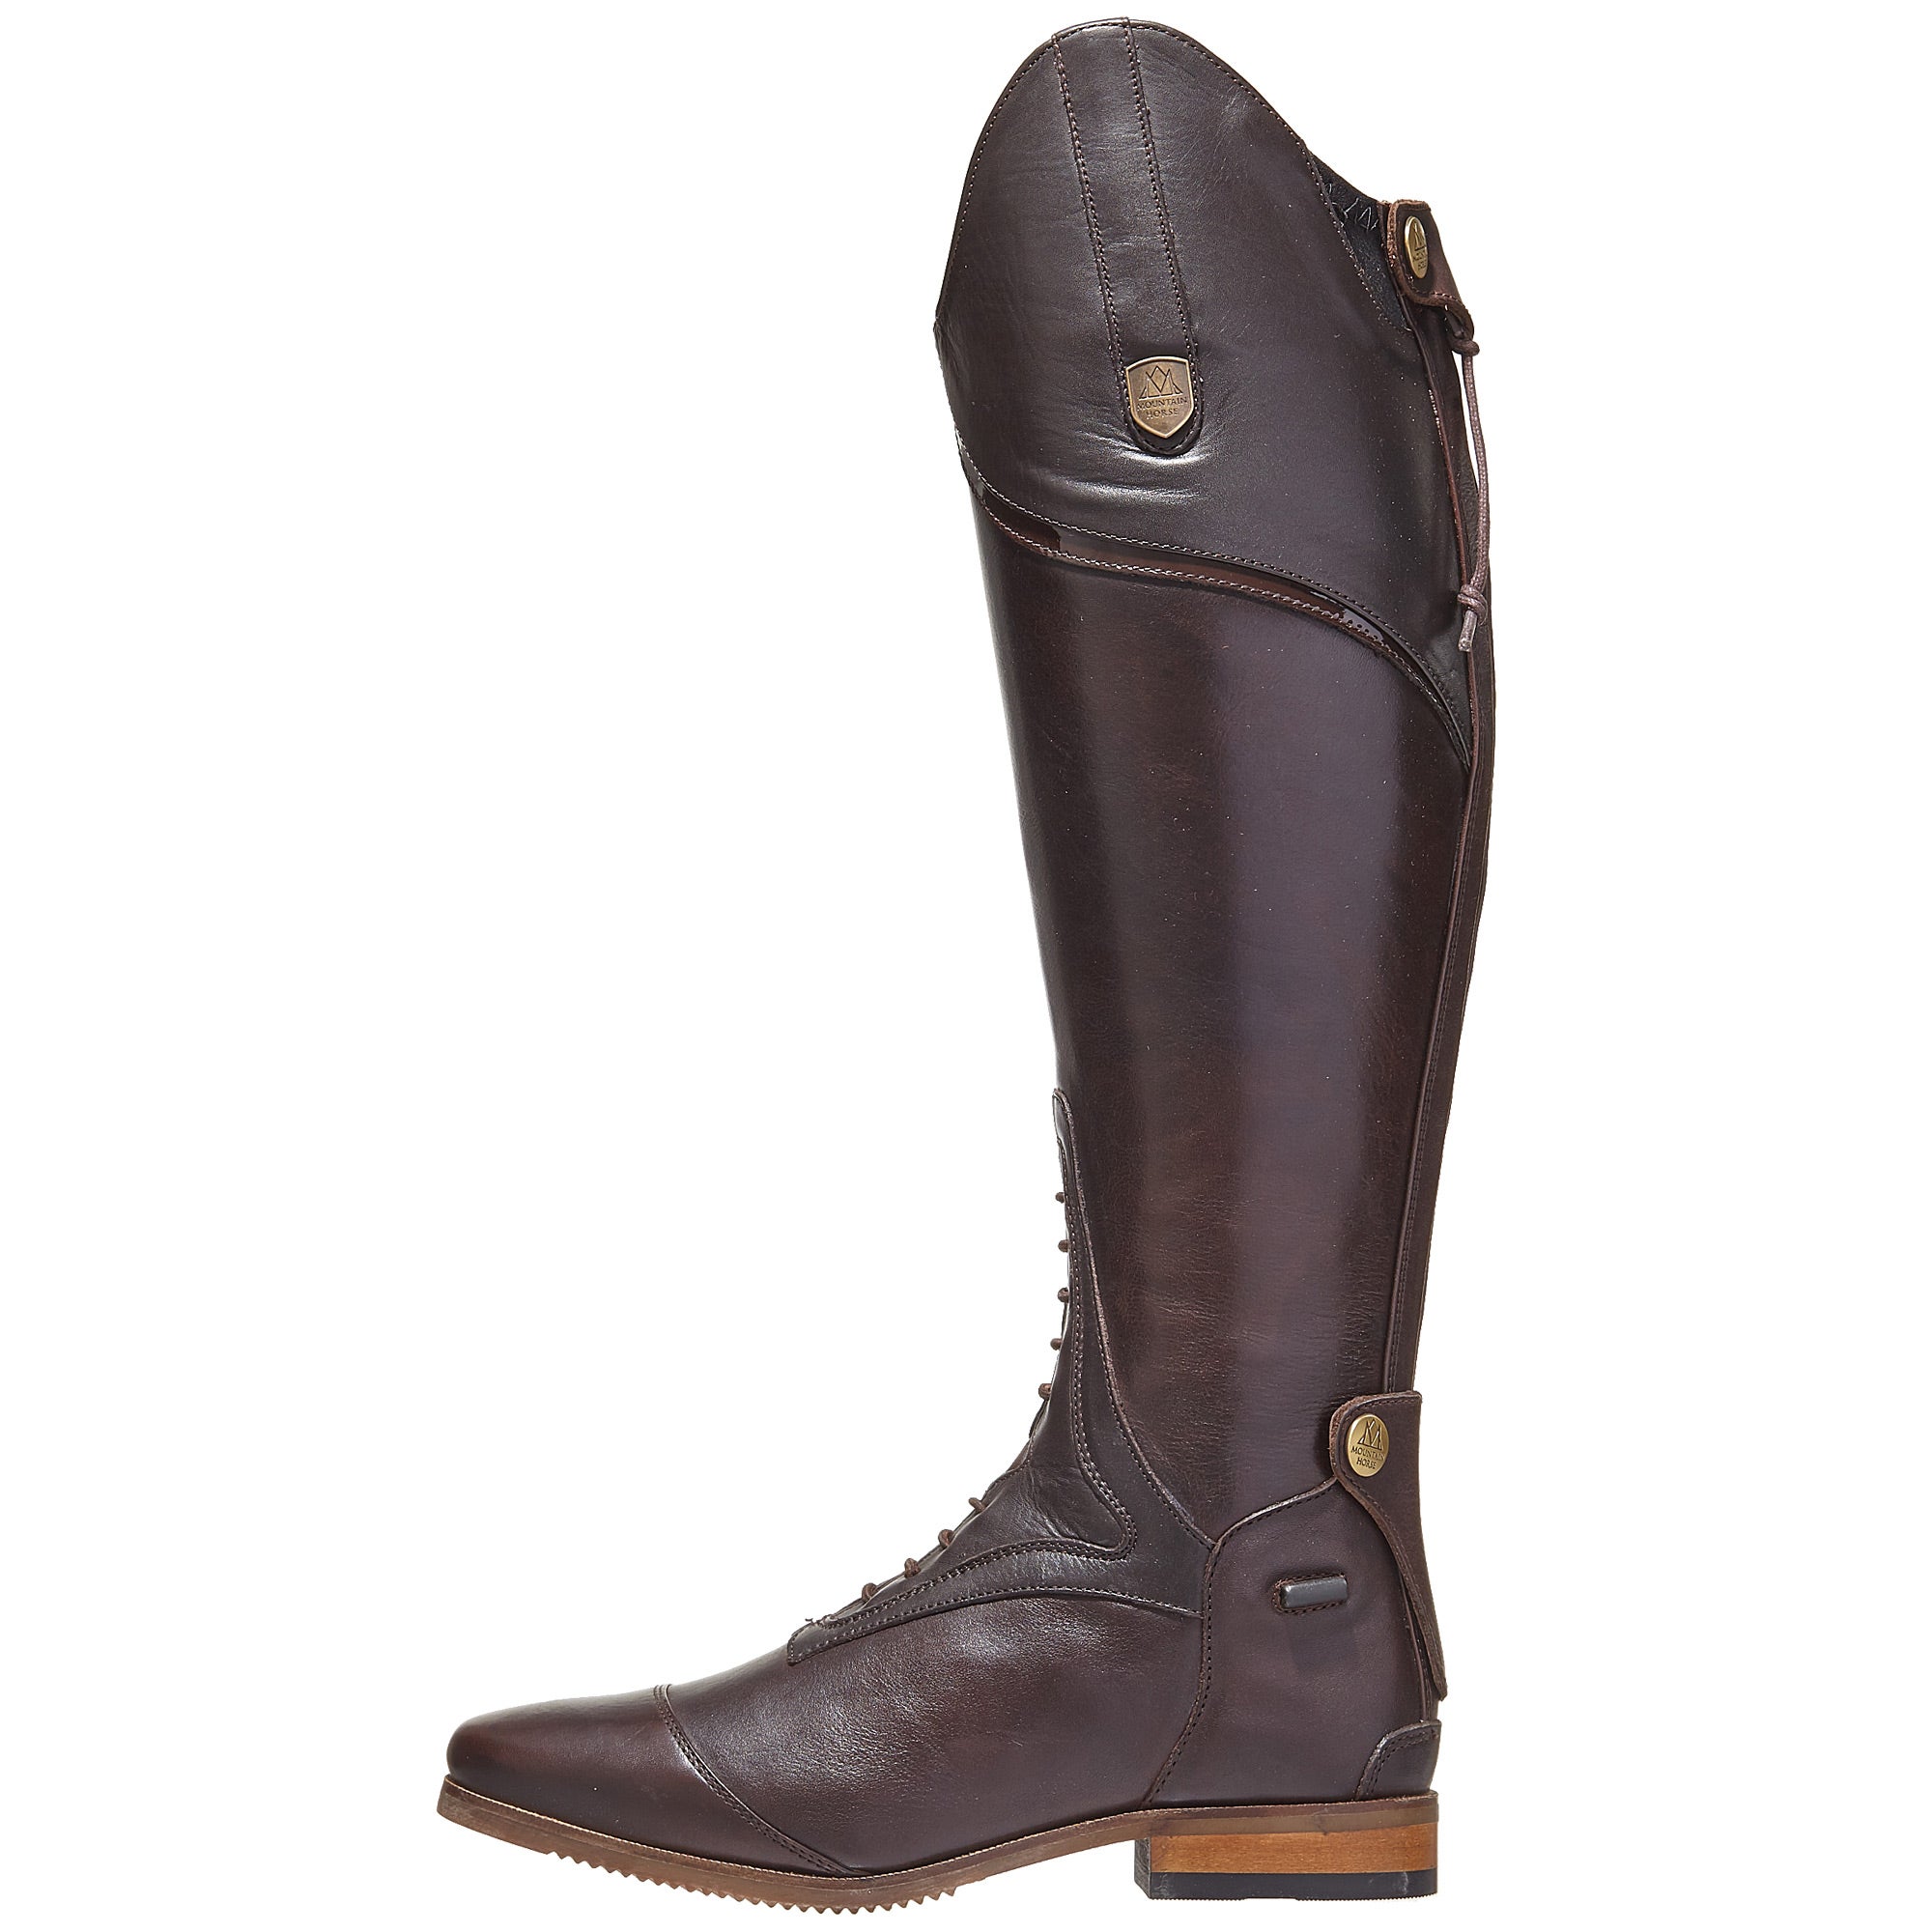 Mountain Horse Sovereign Tall Field Boot-New Dark Brown - Riding Warehouse